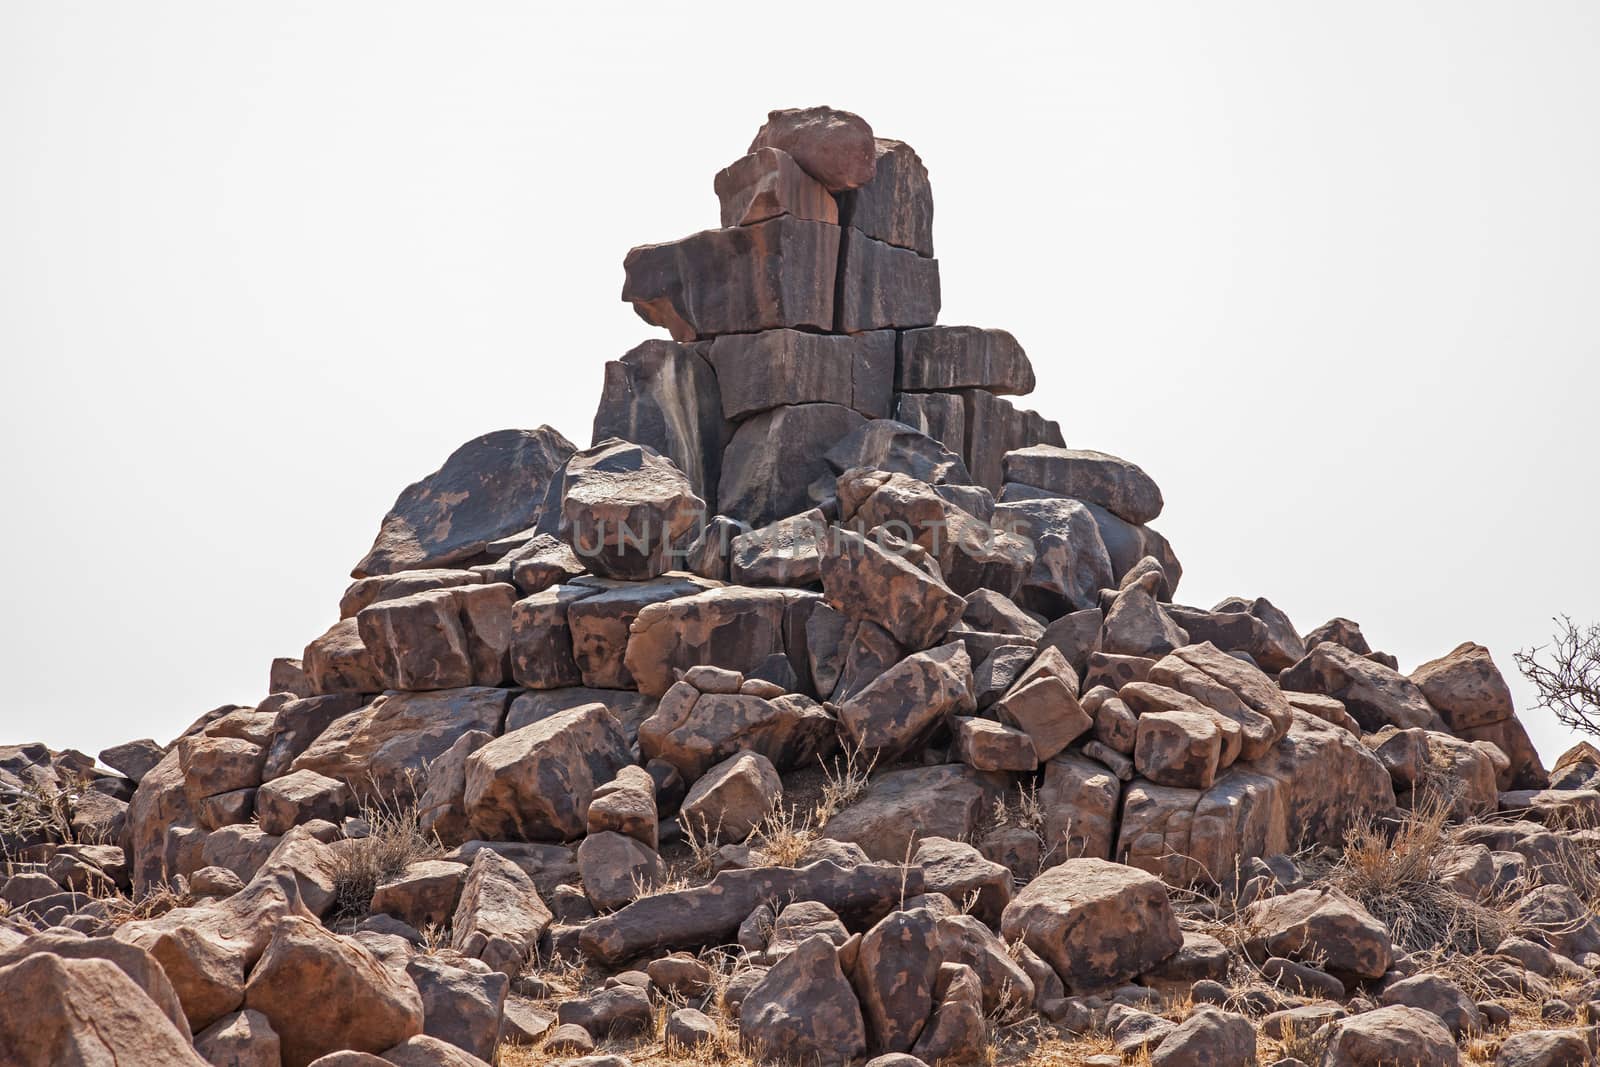 The aptly named landscape gives the impression of large boulders stacked haphazardly. It is actually Dolerite intrusions that eroded into these block shapes.